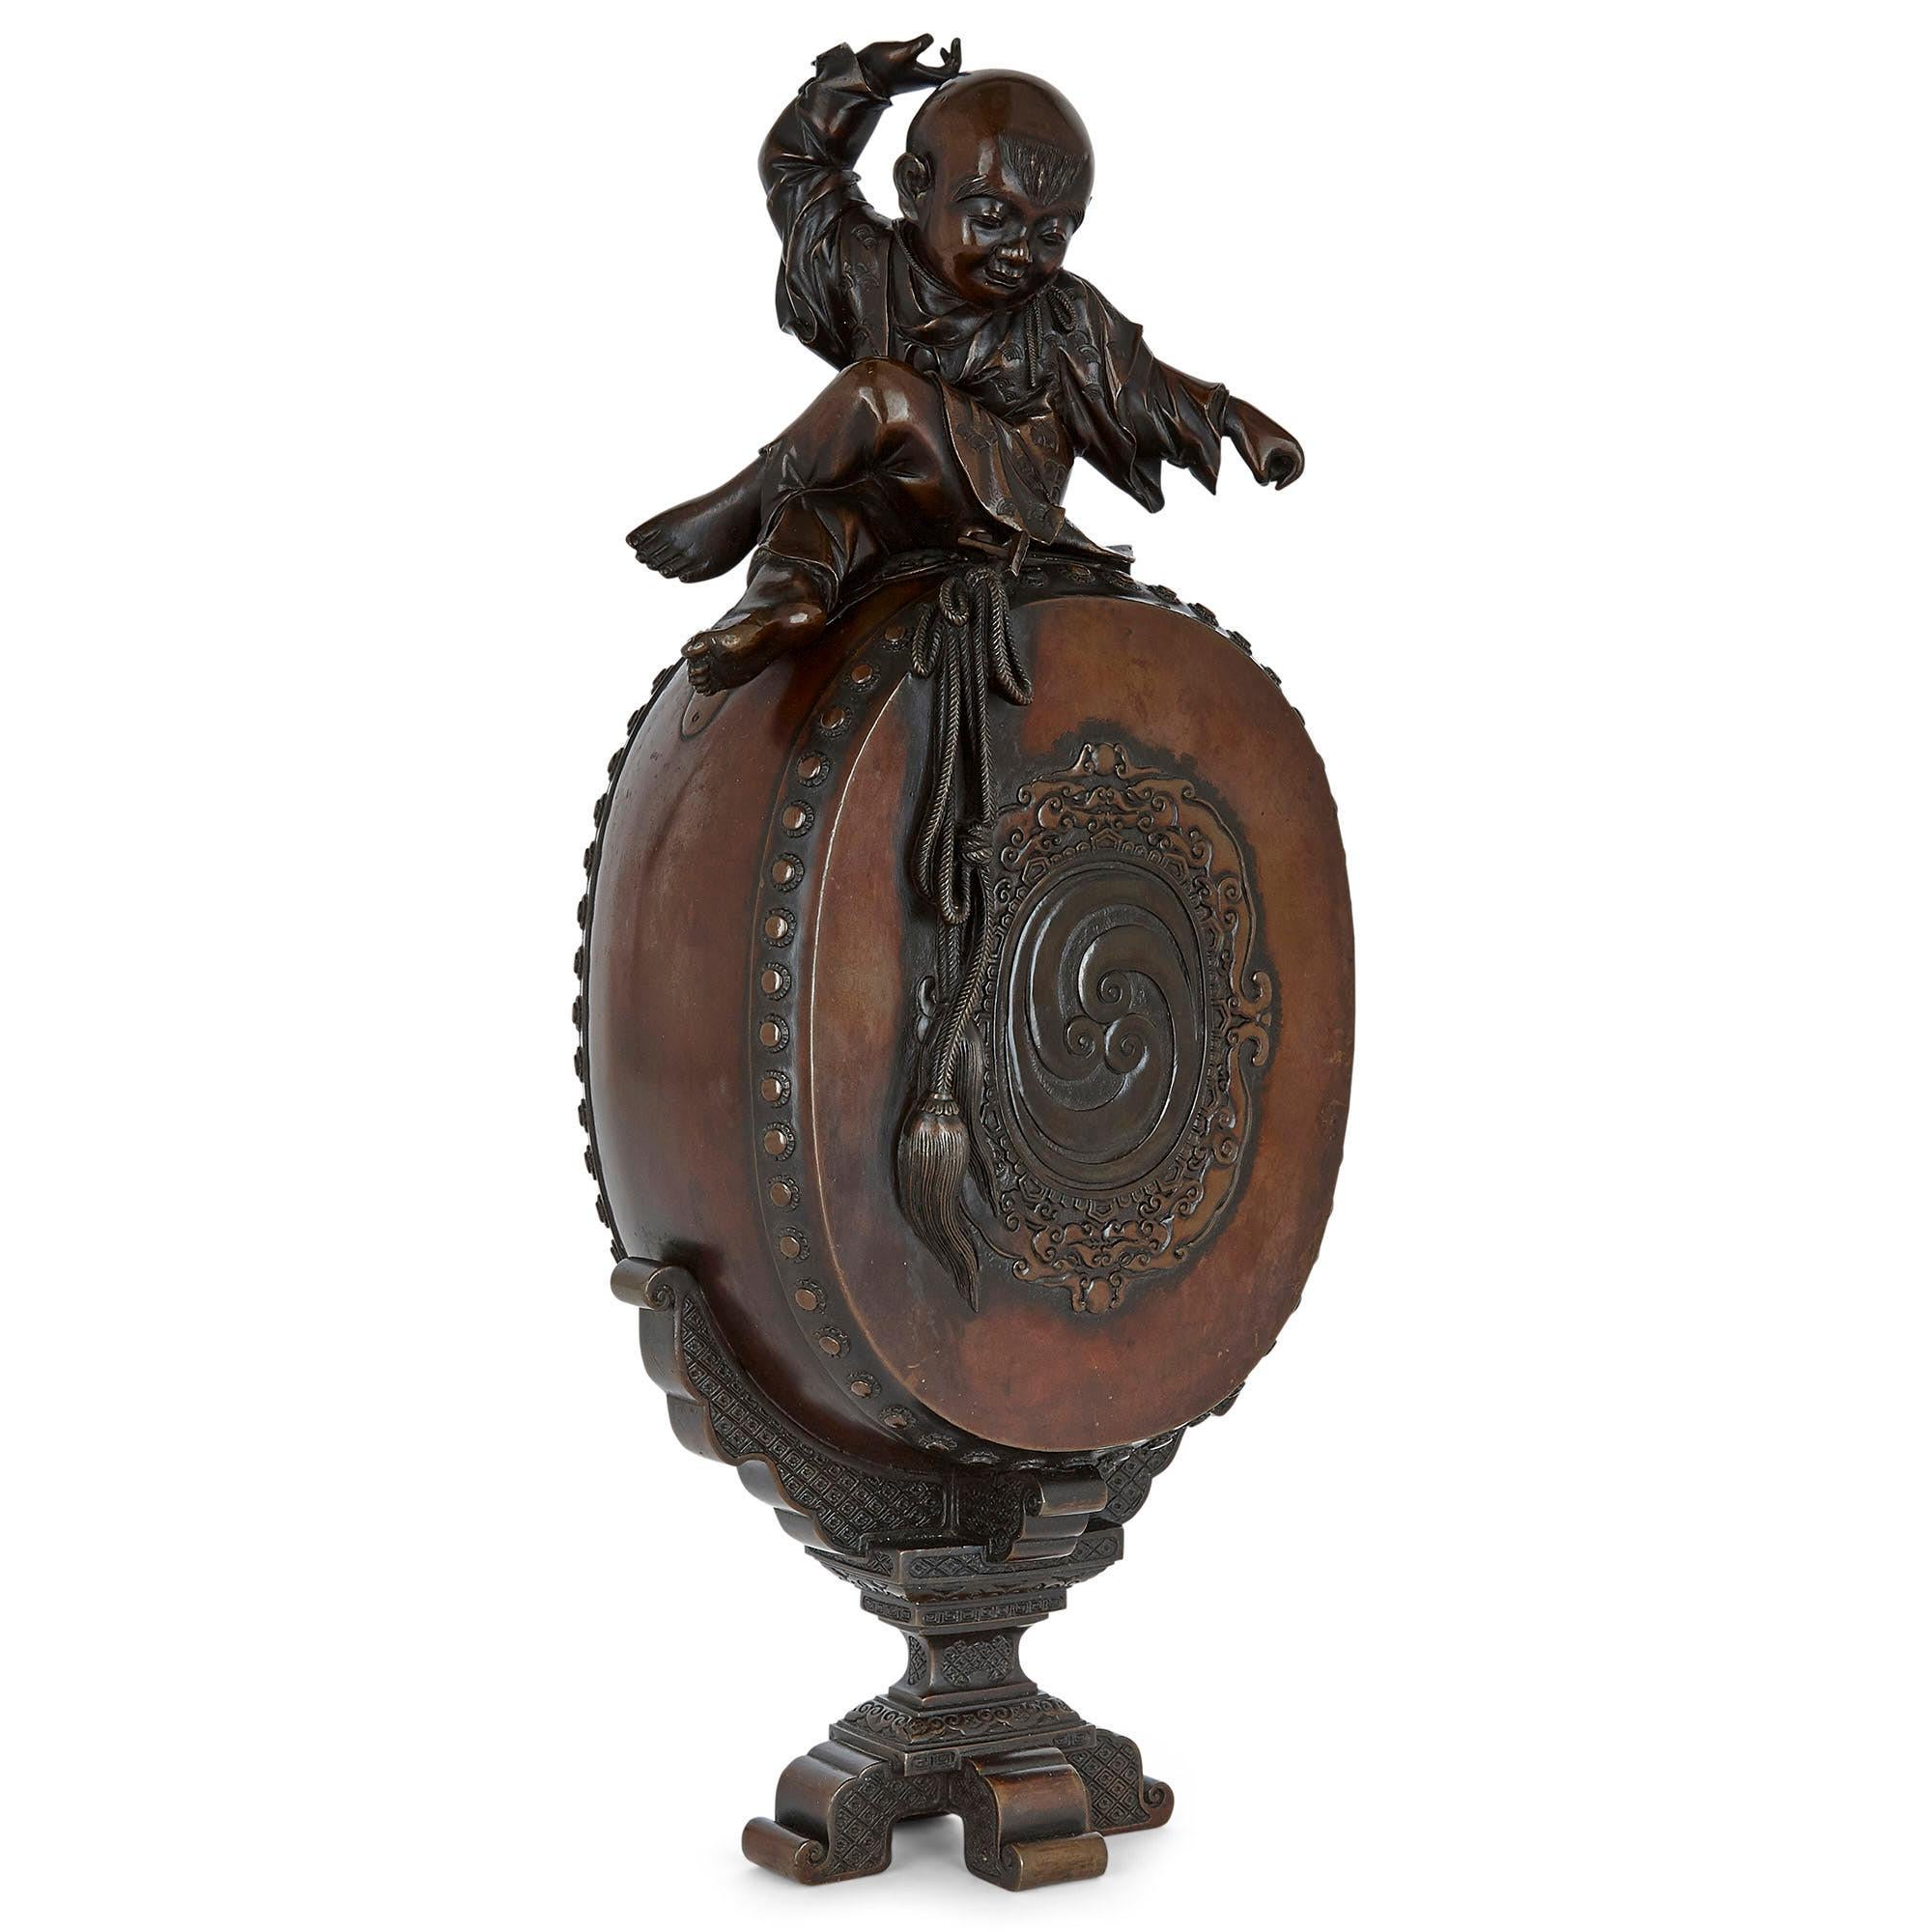 Large Meiji period bronze koro incense burner
Japanese, late 19th Century
Height 39cm, width 16cm, depth 11cm

This wonderful koro—a type of Japanese incense burner—is deftly crafted from patinated bronze. The koro features an ovoid body